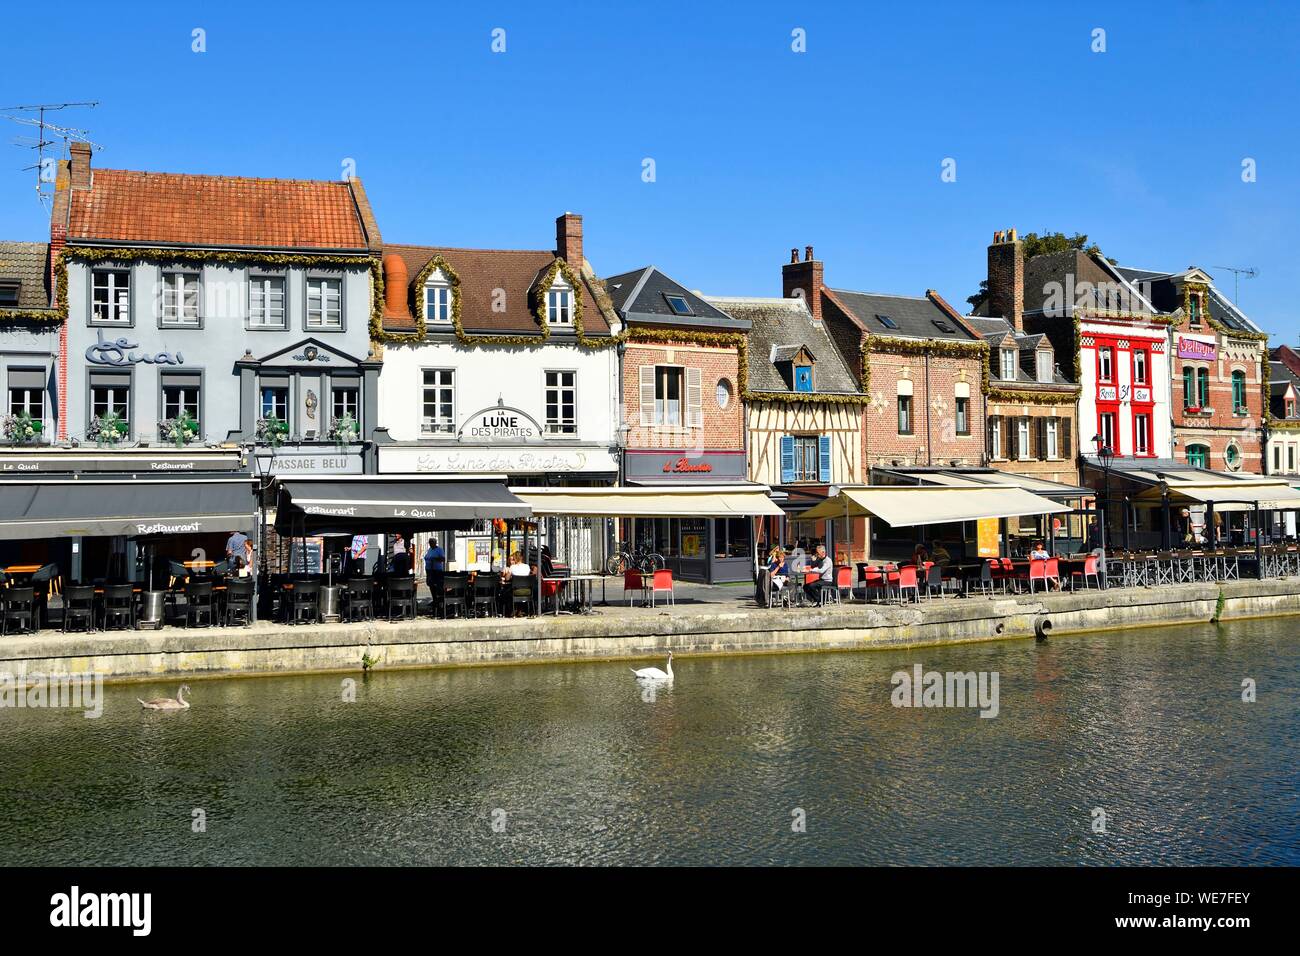 France, Somme, Amiens, Saint-Leu district, Quai Belu on the banks of the Somme river Stock Photo